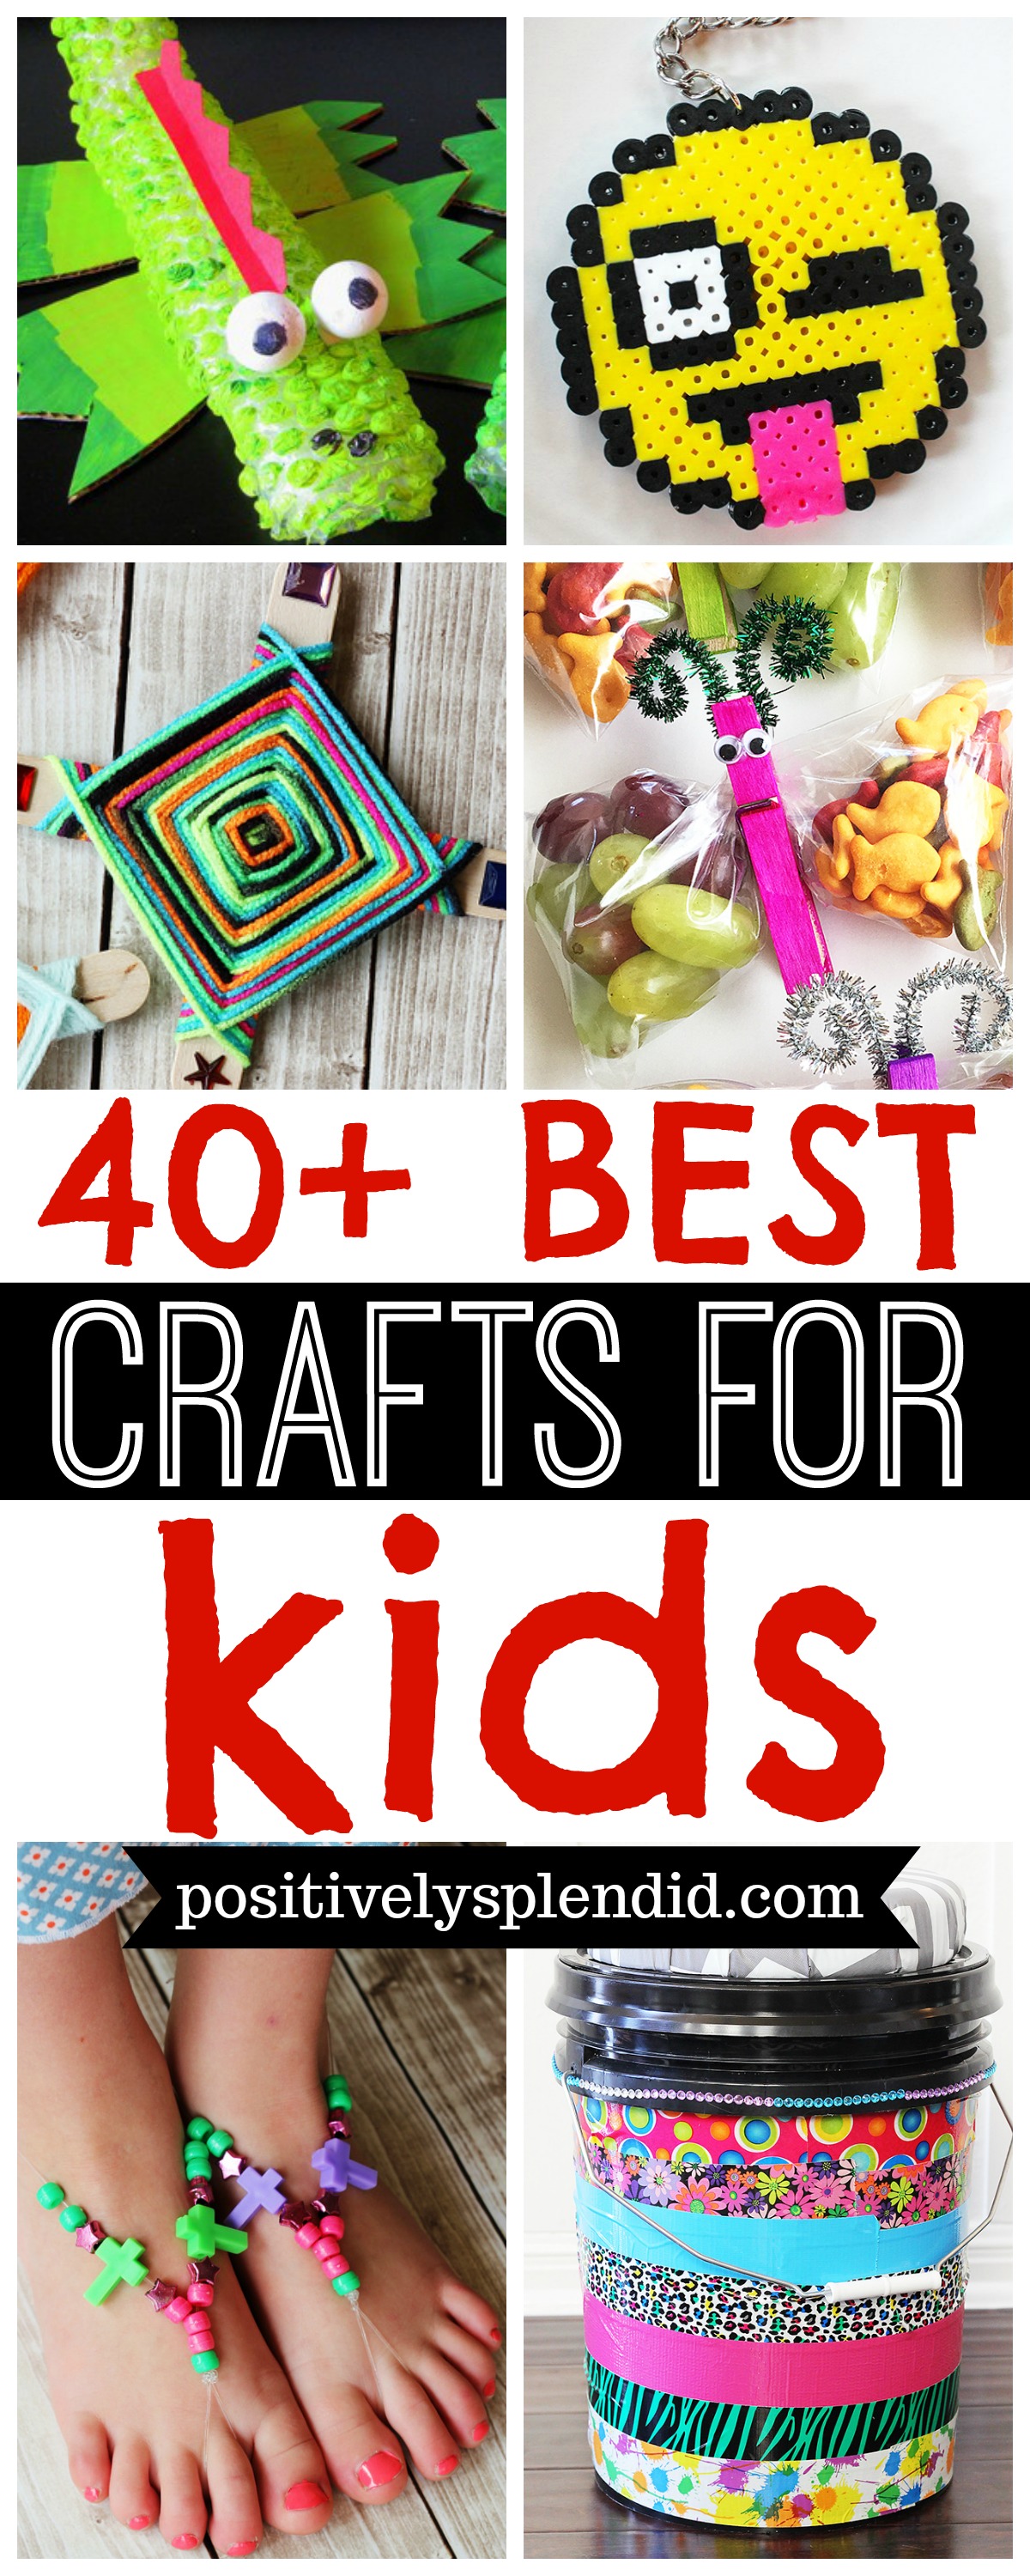 Crafts Project Ideas for Elementary School Kids